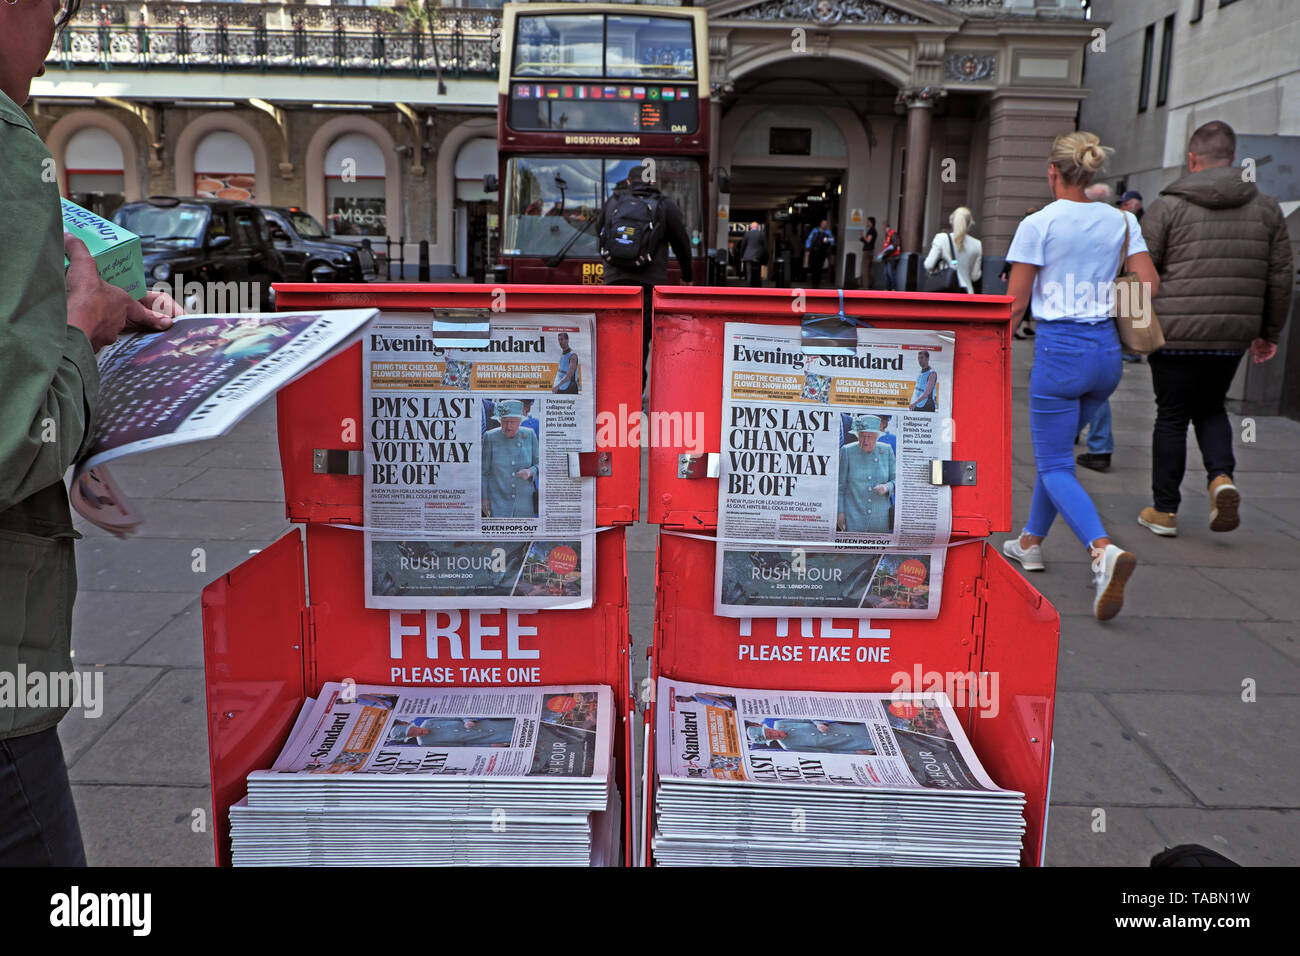 Evening Standard Theresa May Brexit newspaper headline on newsstand 'PM's Last Chance Vote May be Off' outside Charing Cross Station in Westminster London UK  21 May 2019 Stock Photo